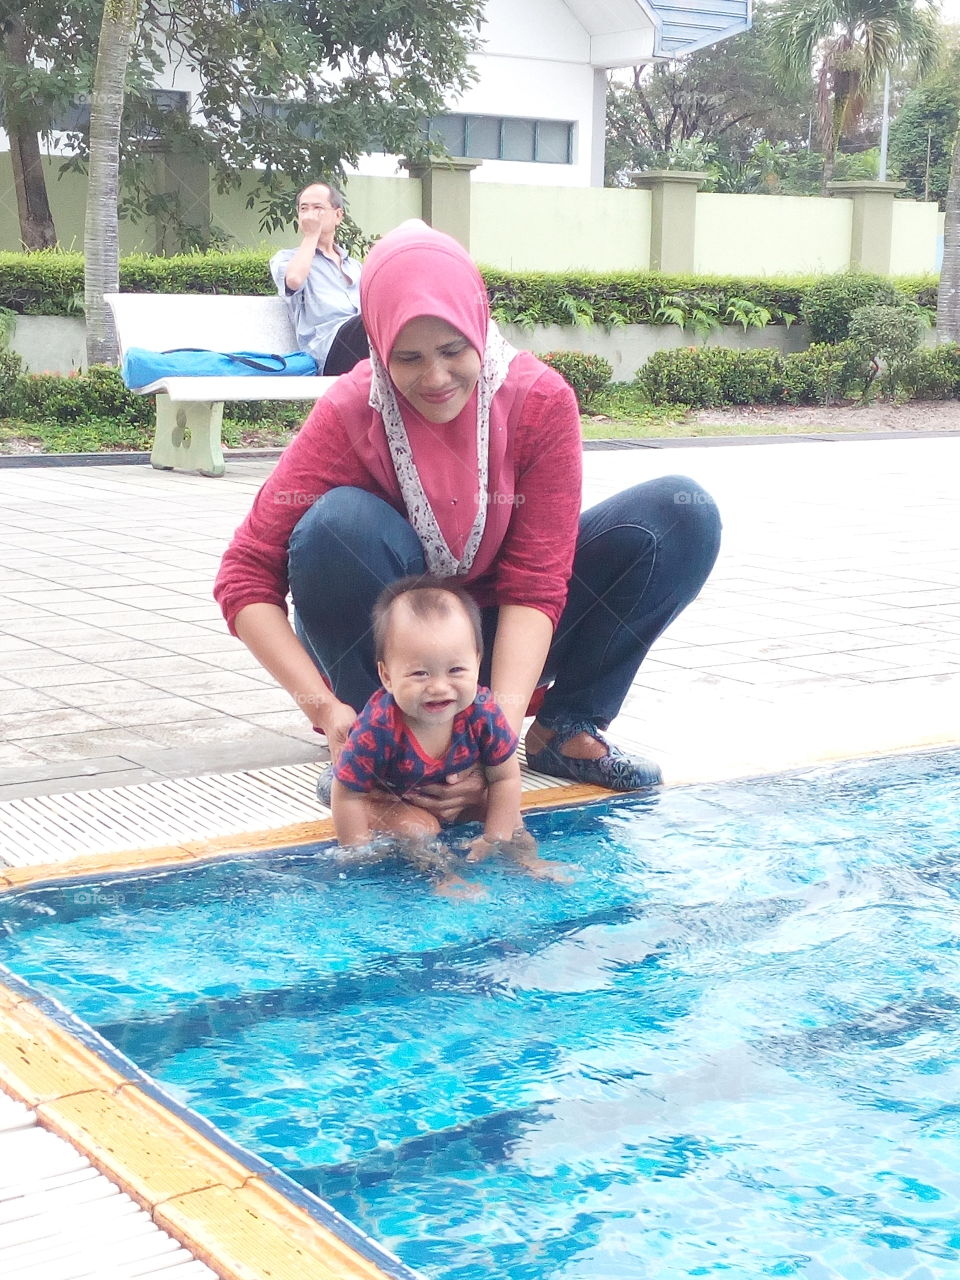 You're cute baby and nice smile . My Mother and with her grandchild , it's so happy family . We're at our big family swimming pool. Enjoy the day!